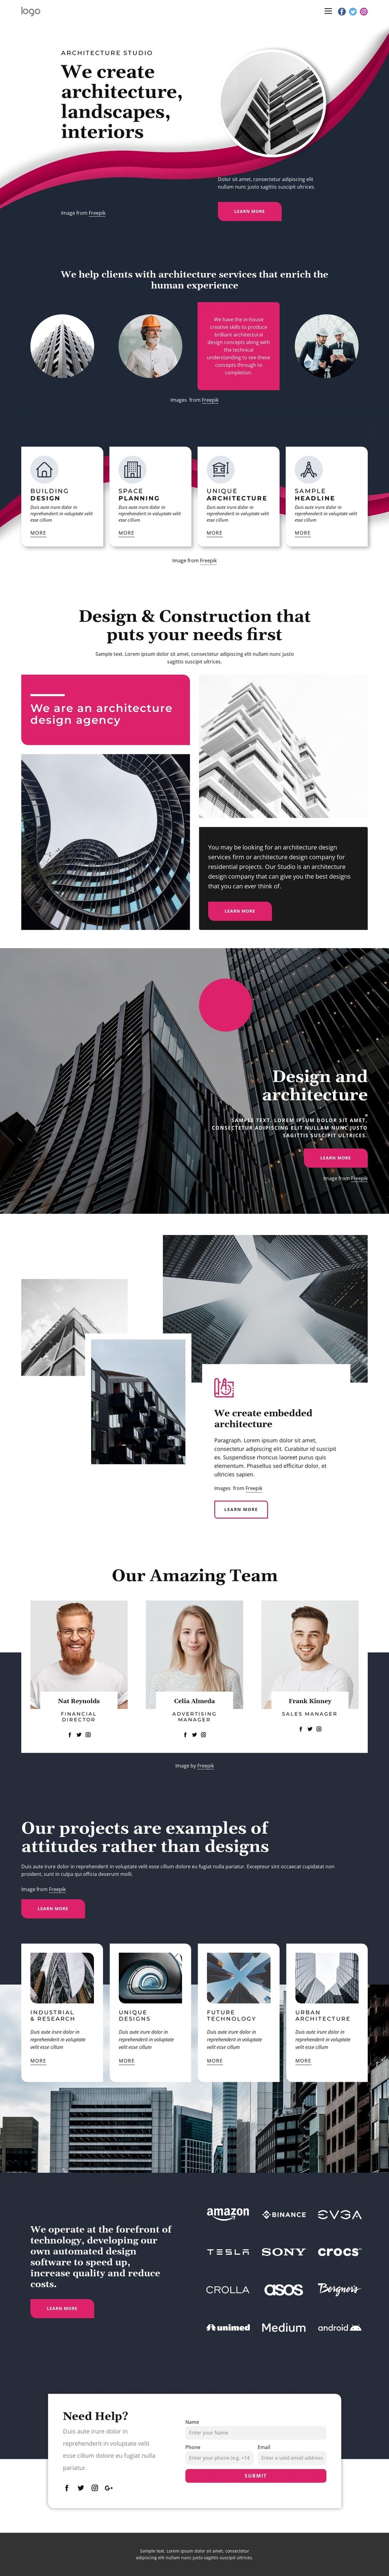 We create great architecture CSS Template